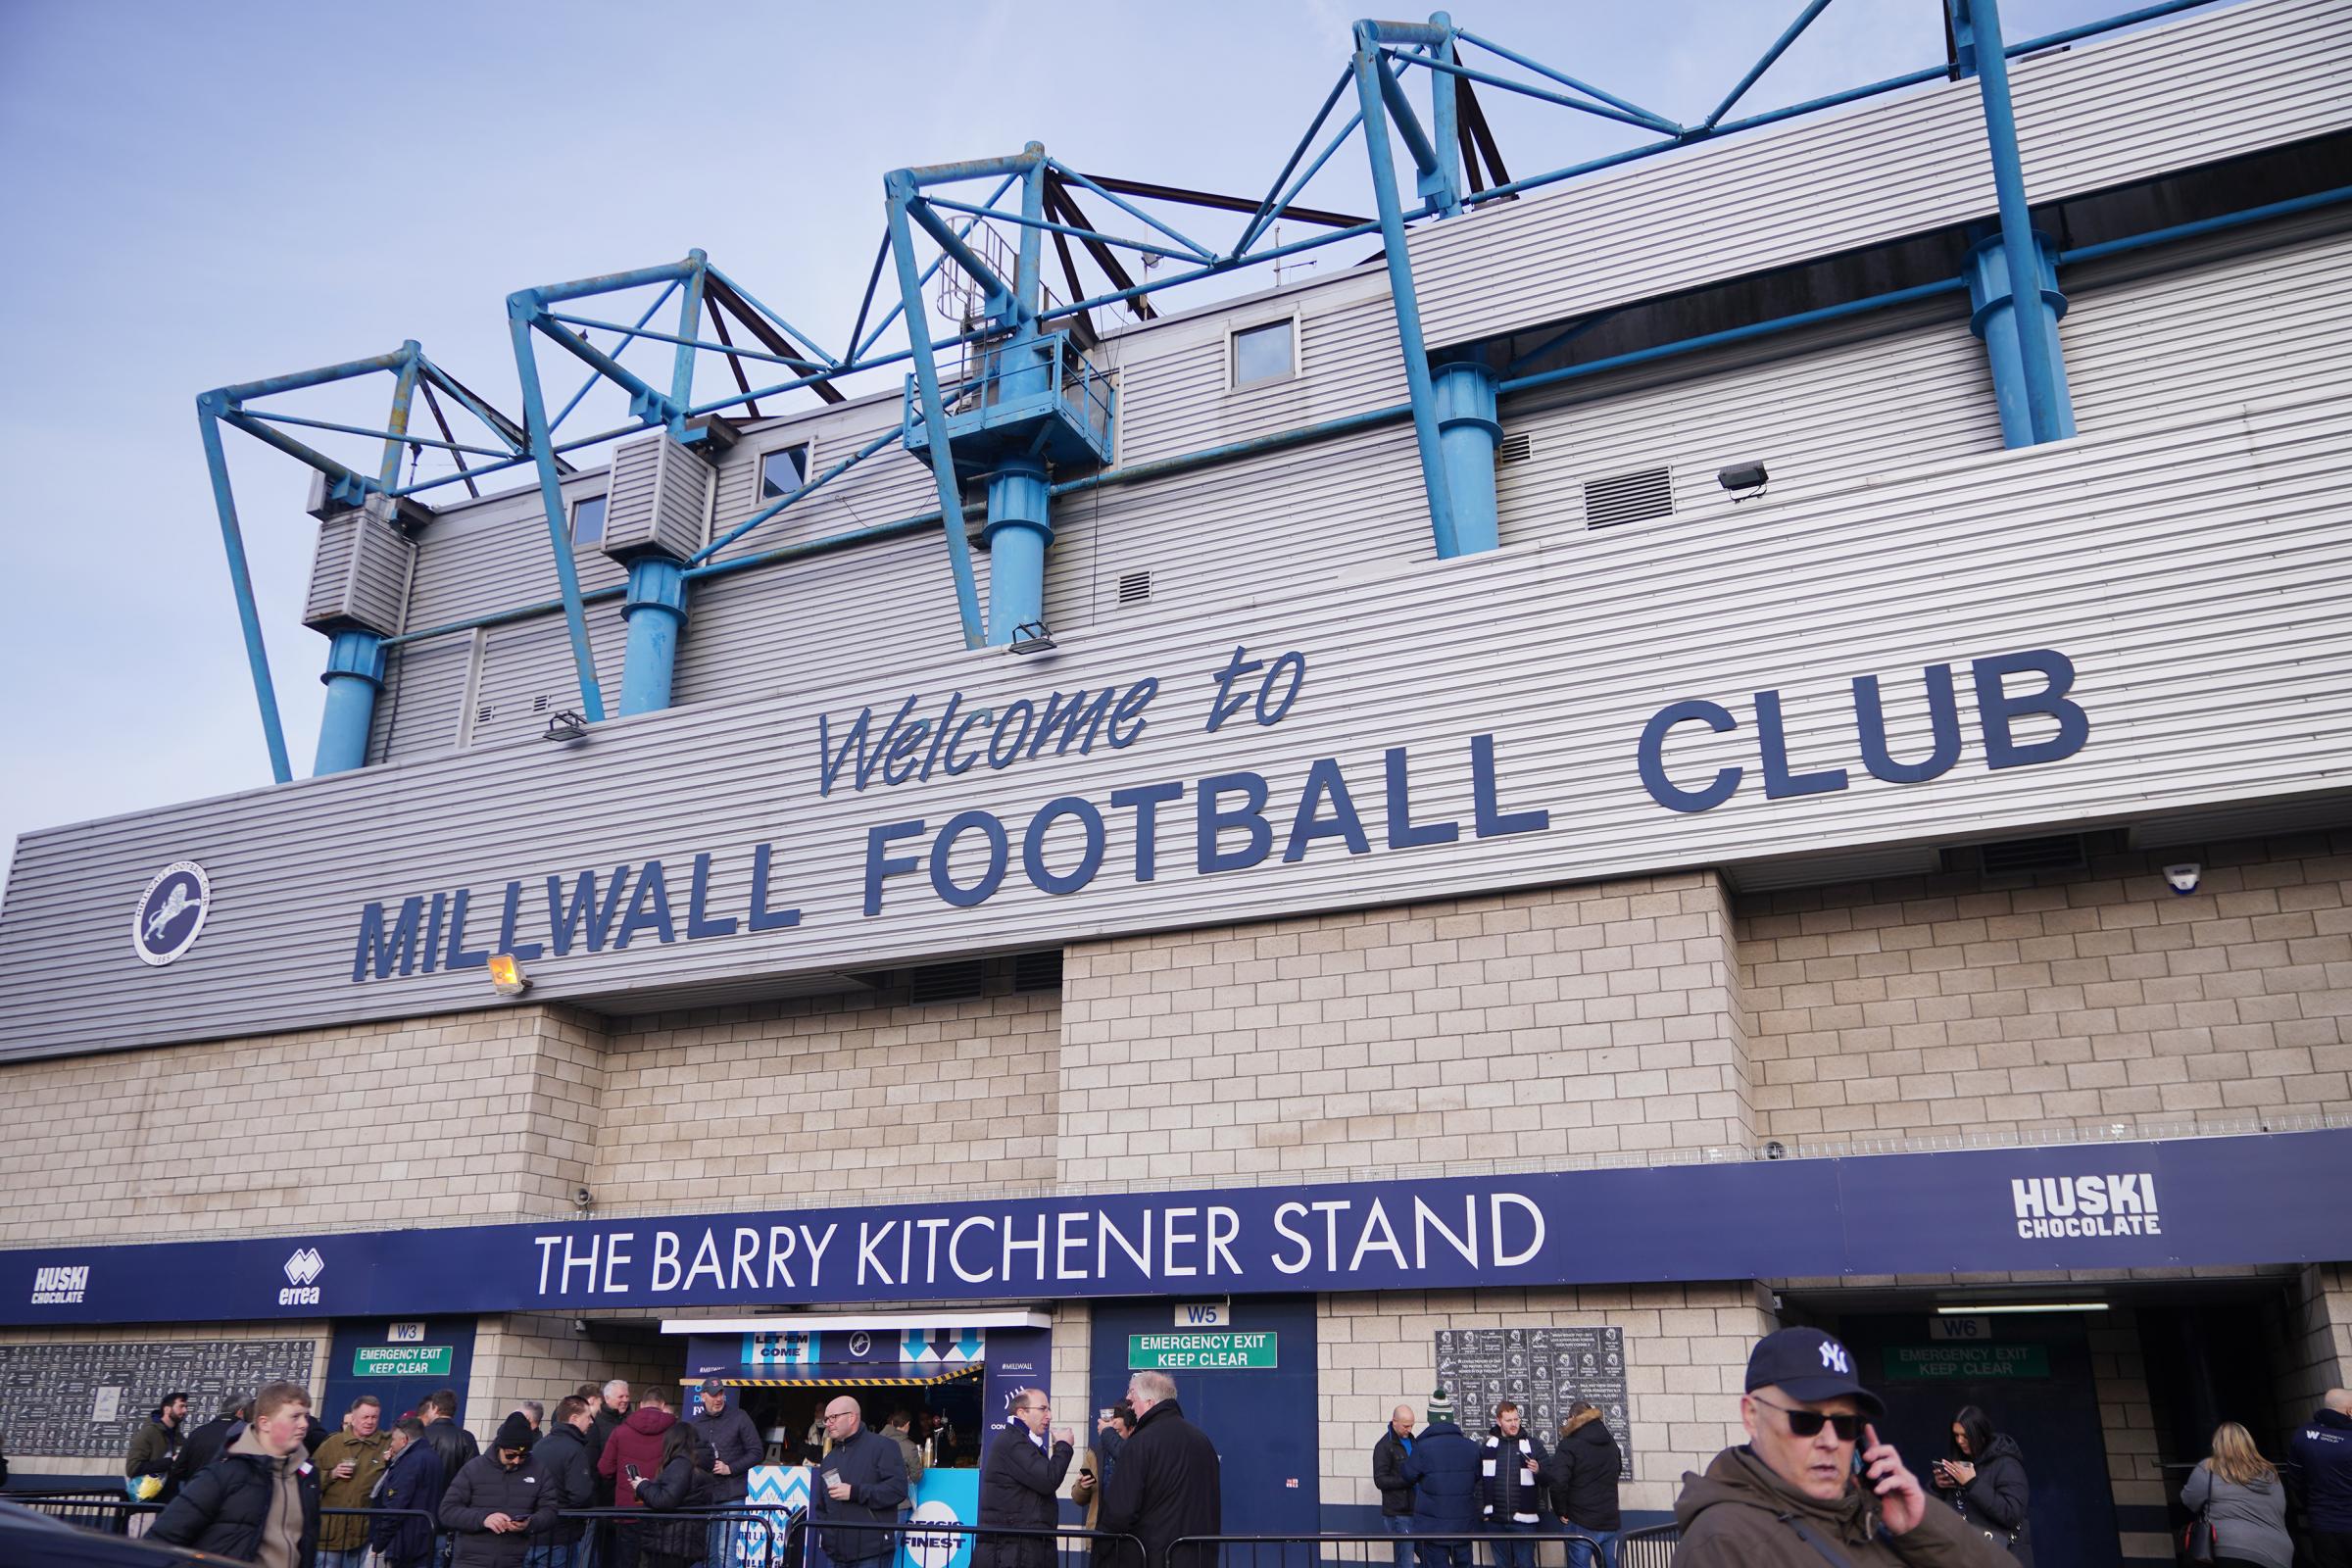 Southampton given 1,514 allocation for pre-season friendly at Millwall